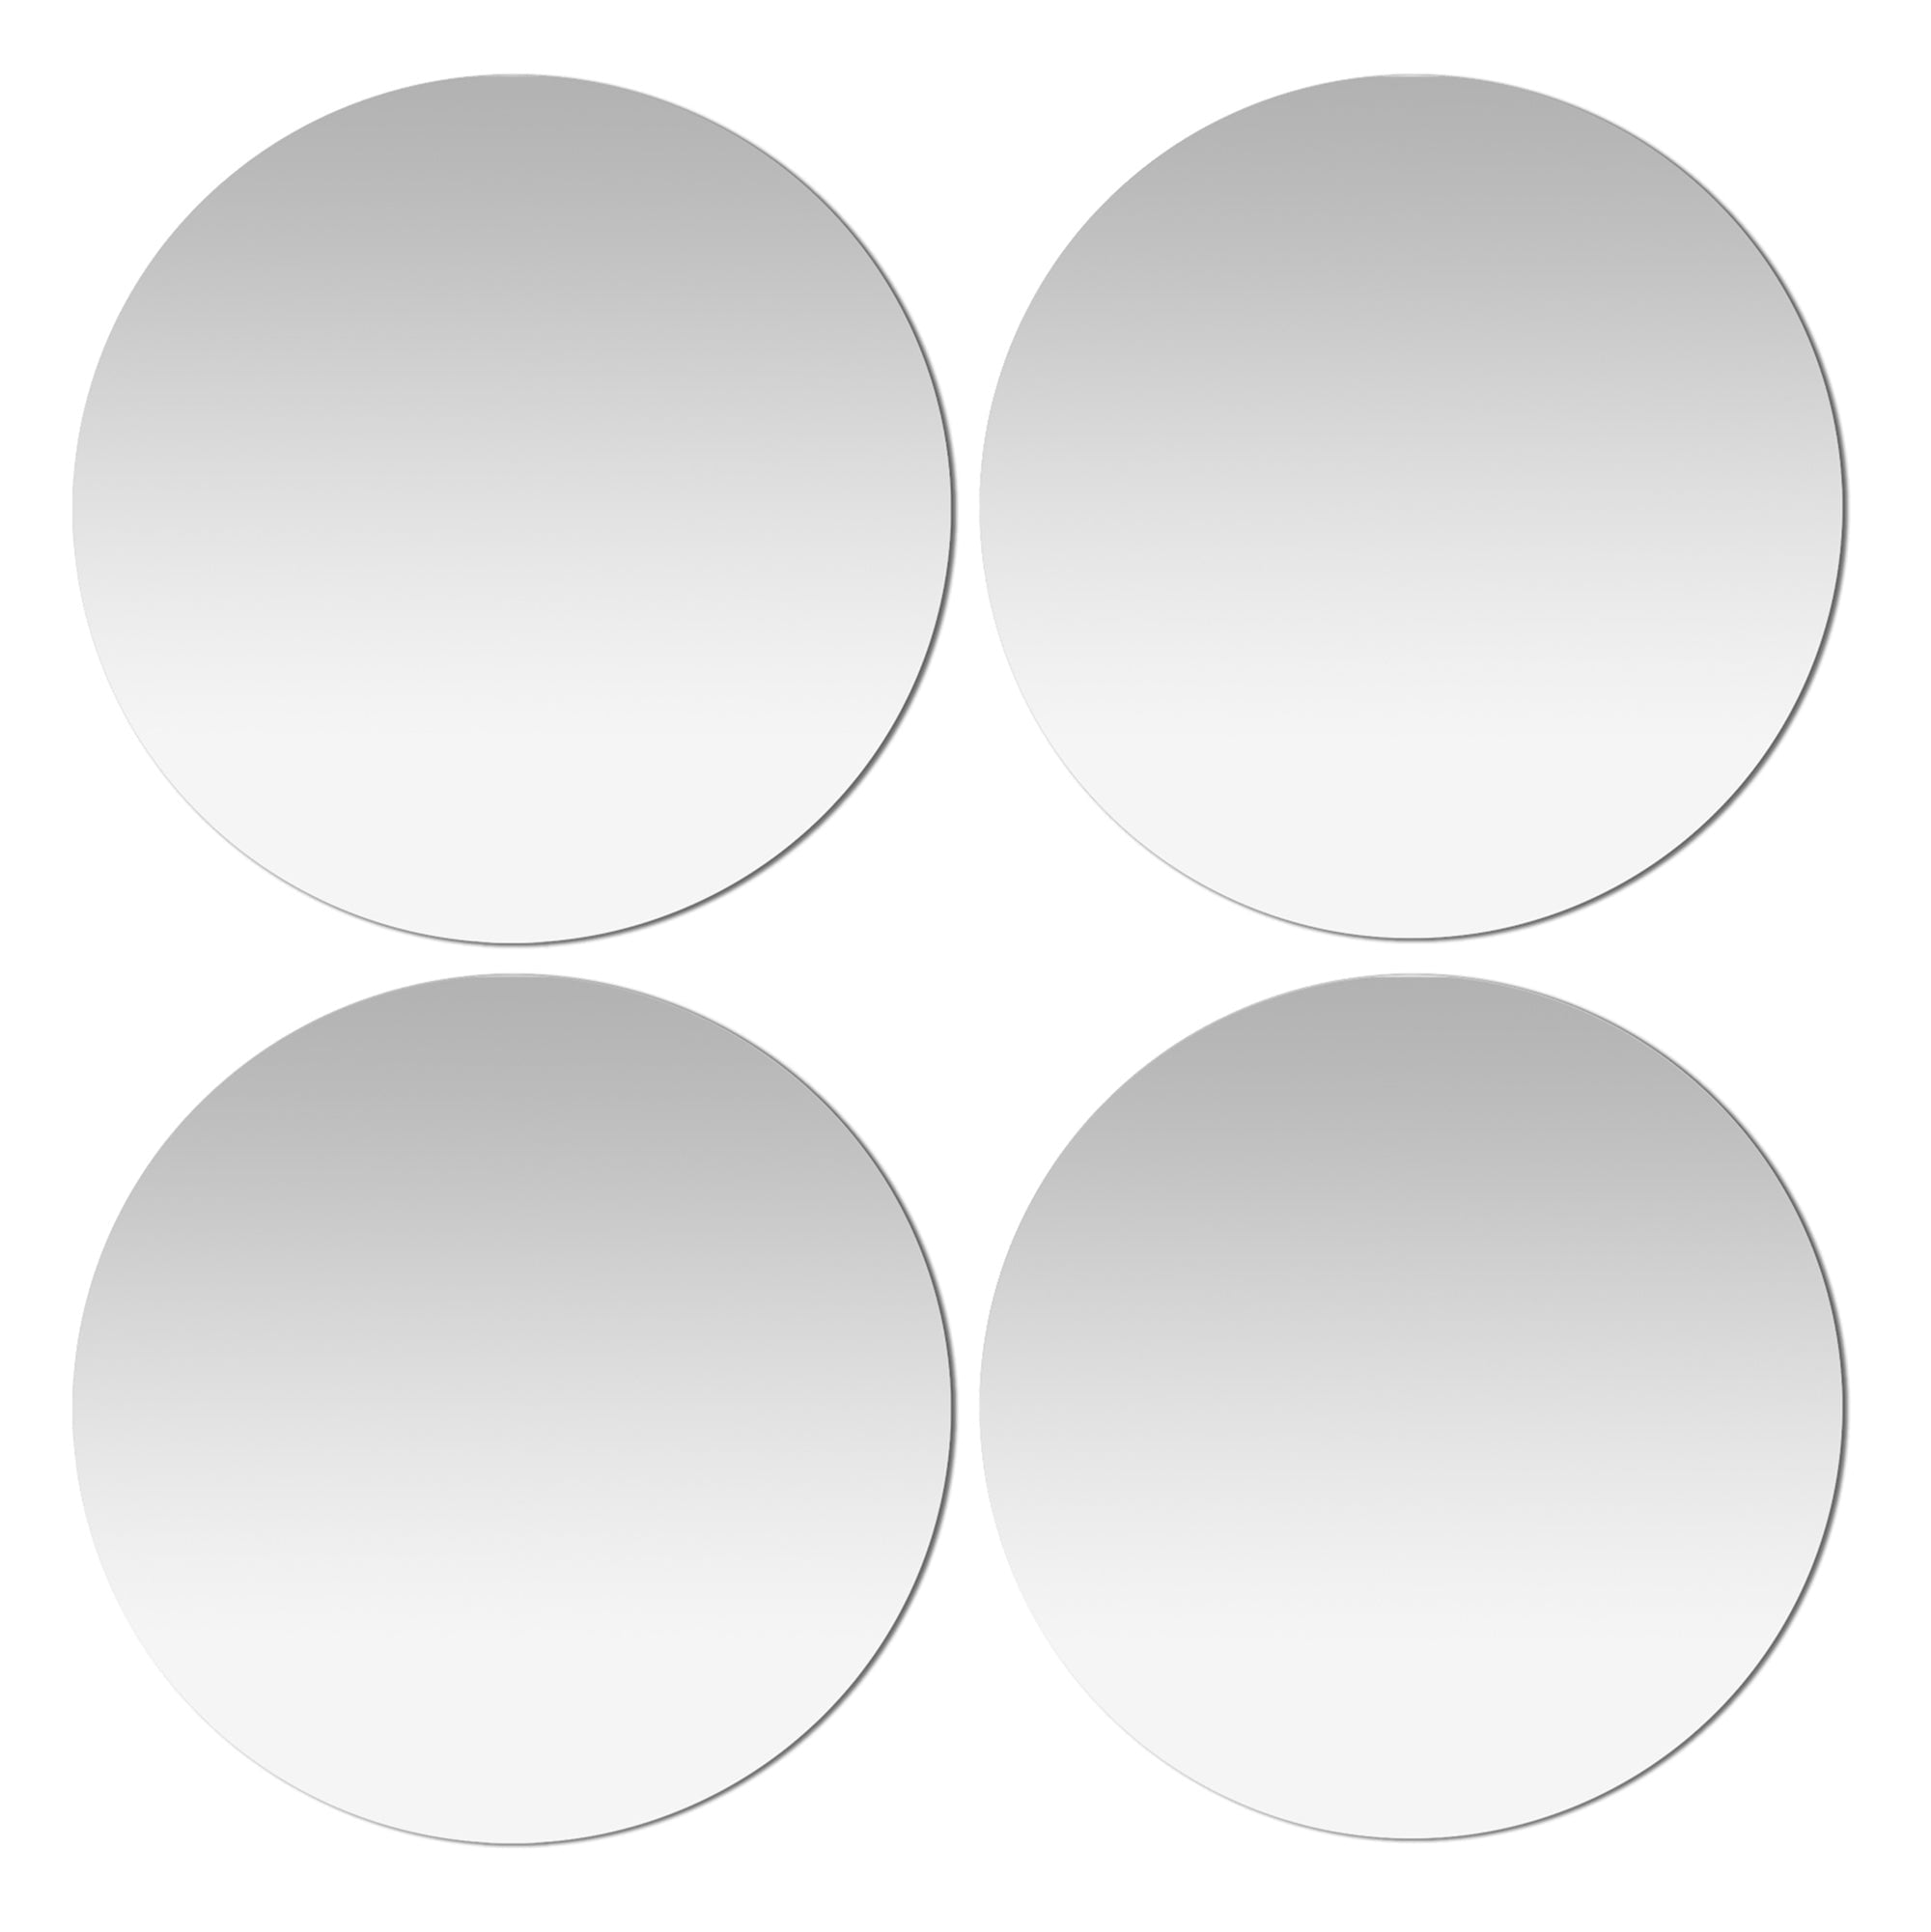 Americanflat 4pcs Set Adhesive Mirror Tiles - Exclamation Rectangular Design - Peel and Stick Mirrors for Wall - Frameless Real Glass Mirror